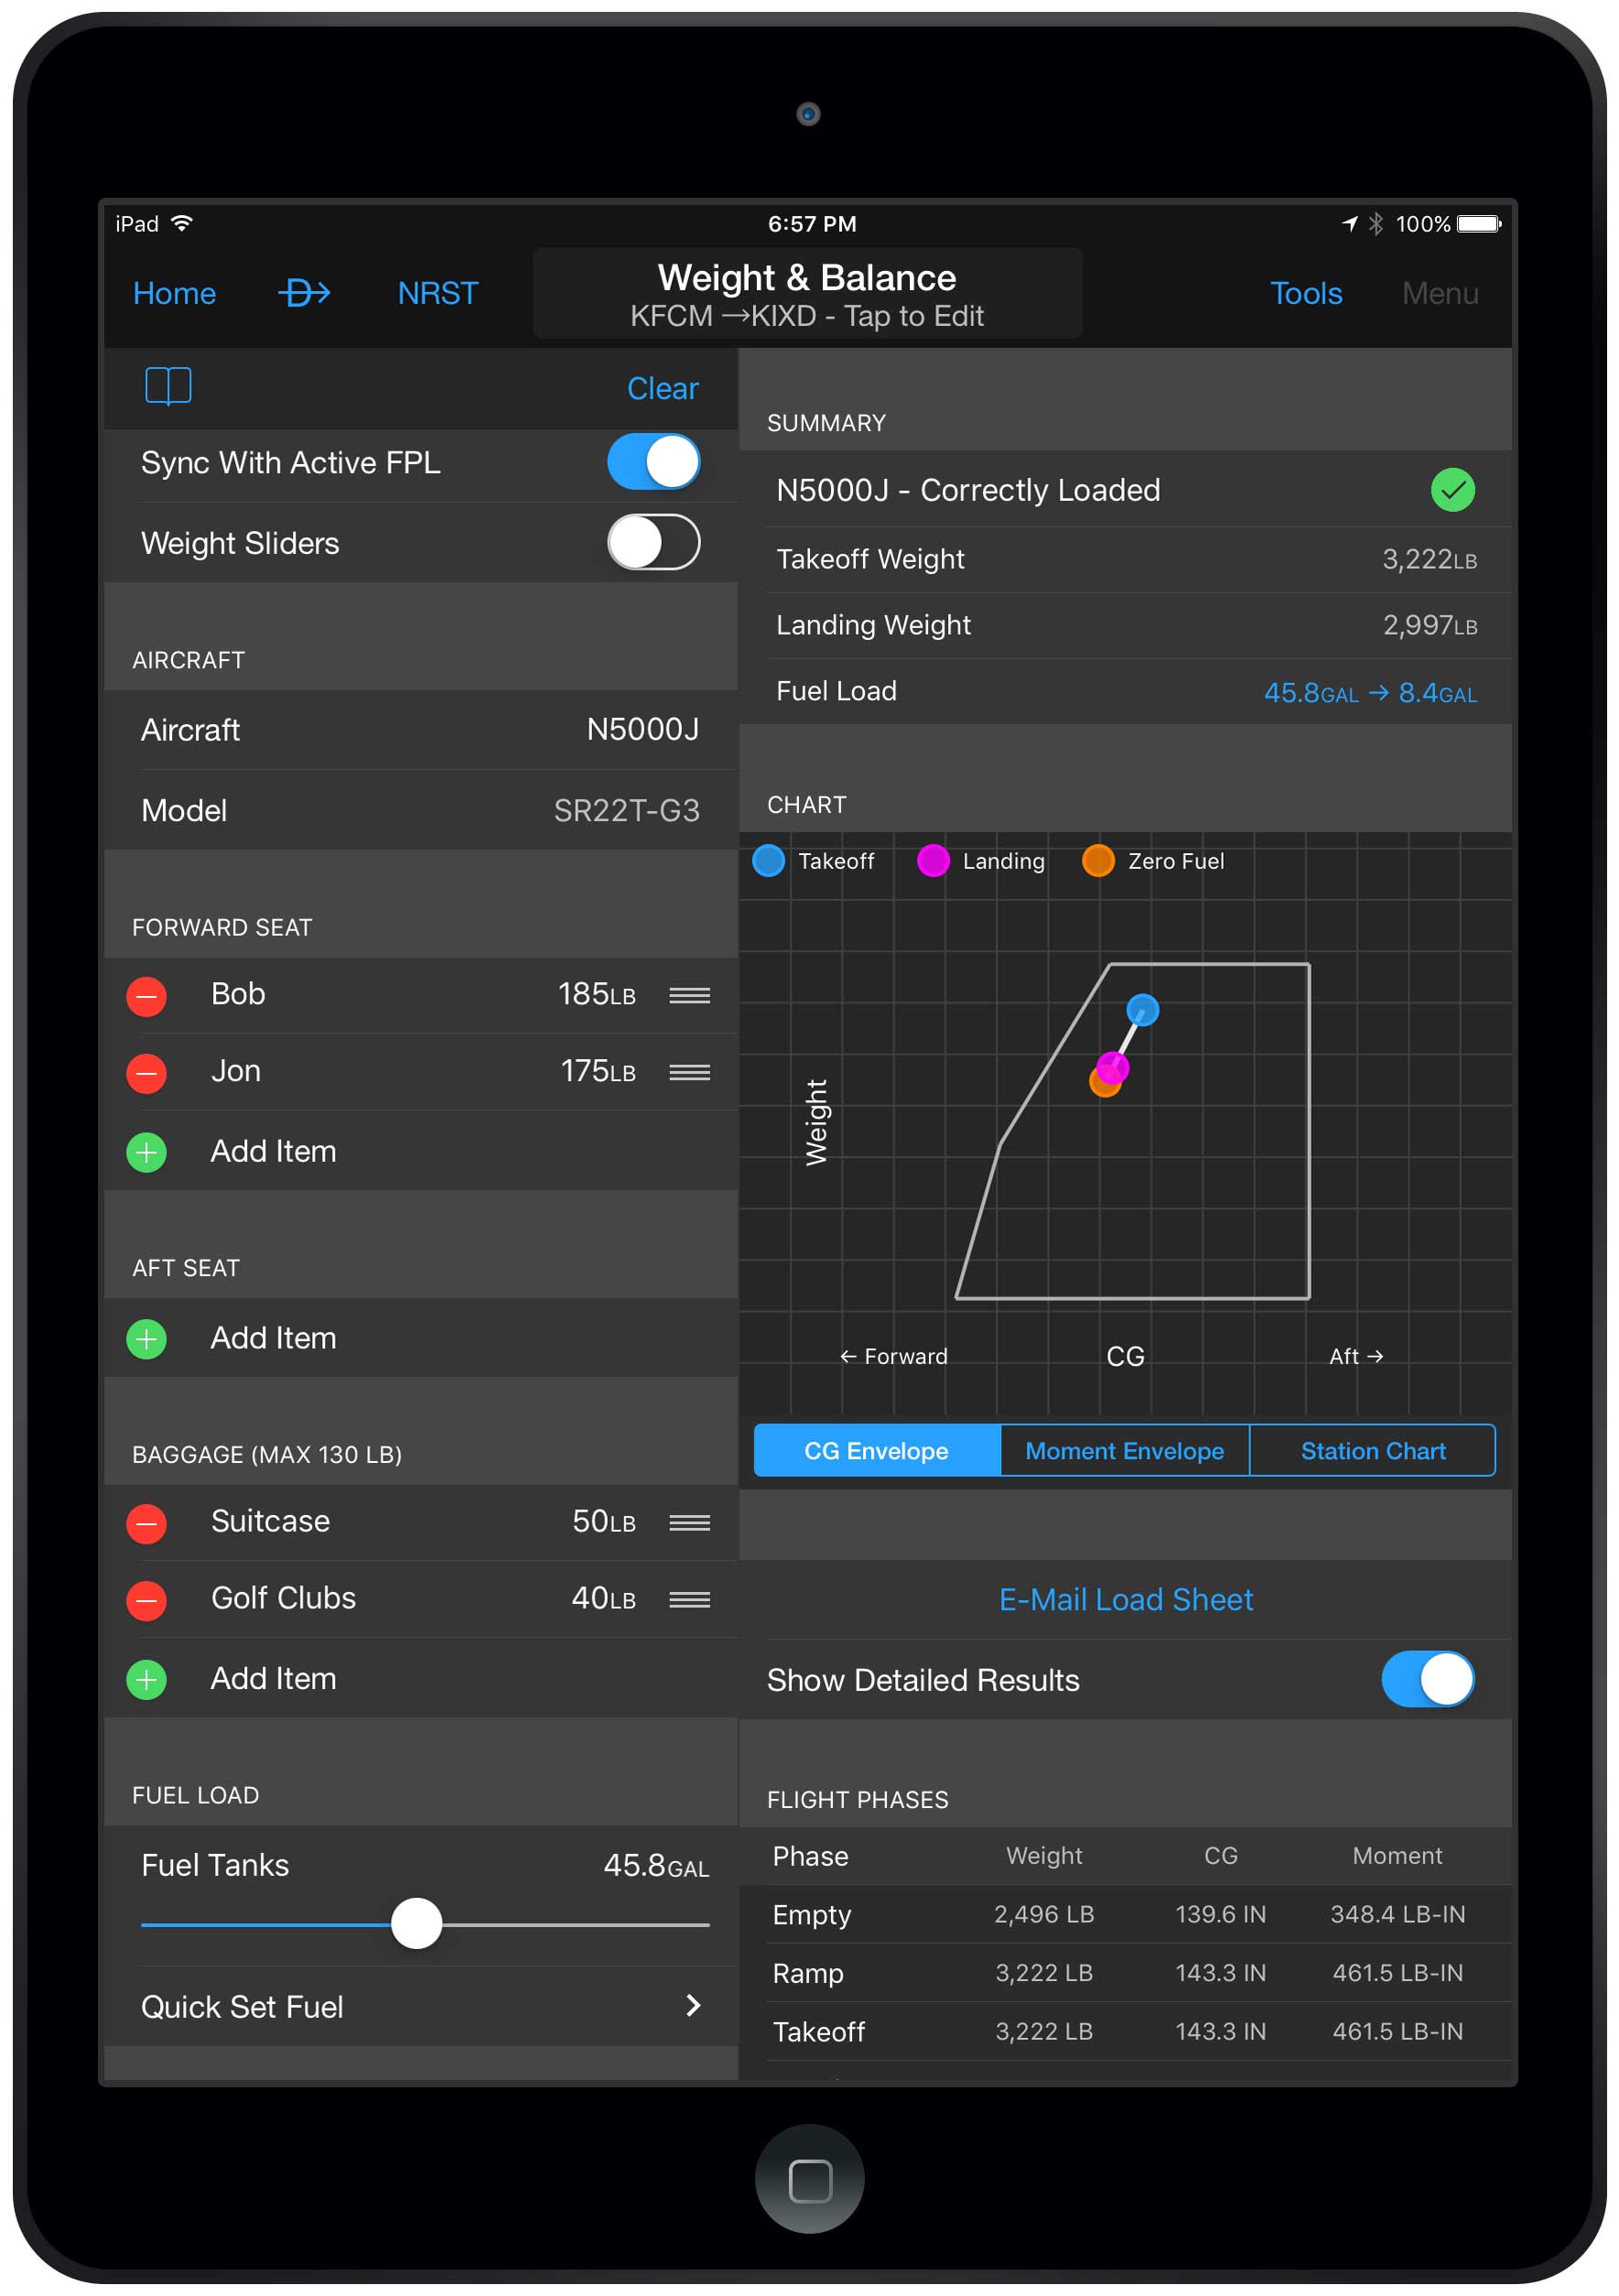 Garmin upgrades Pilot app with W&B and performance calcs